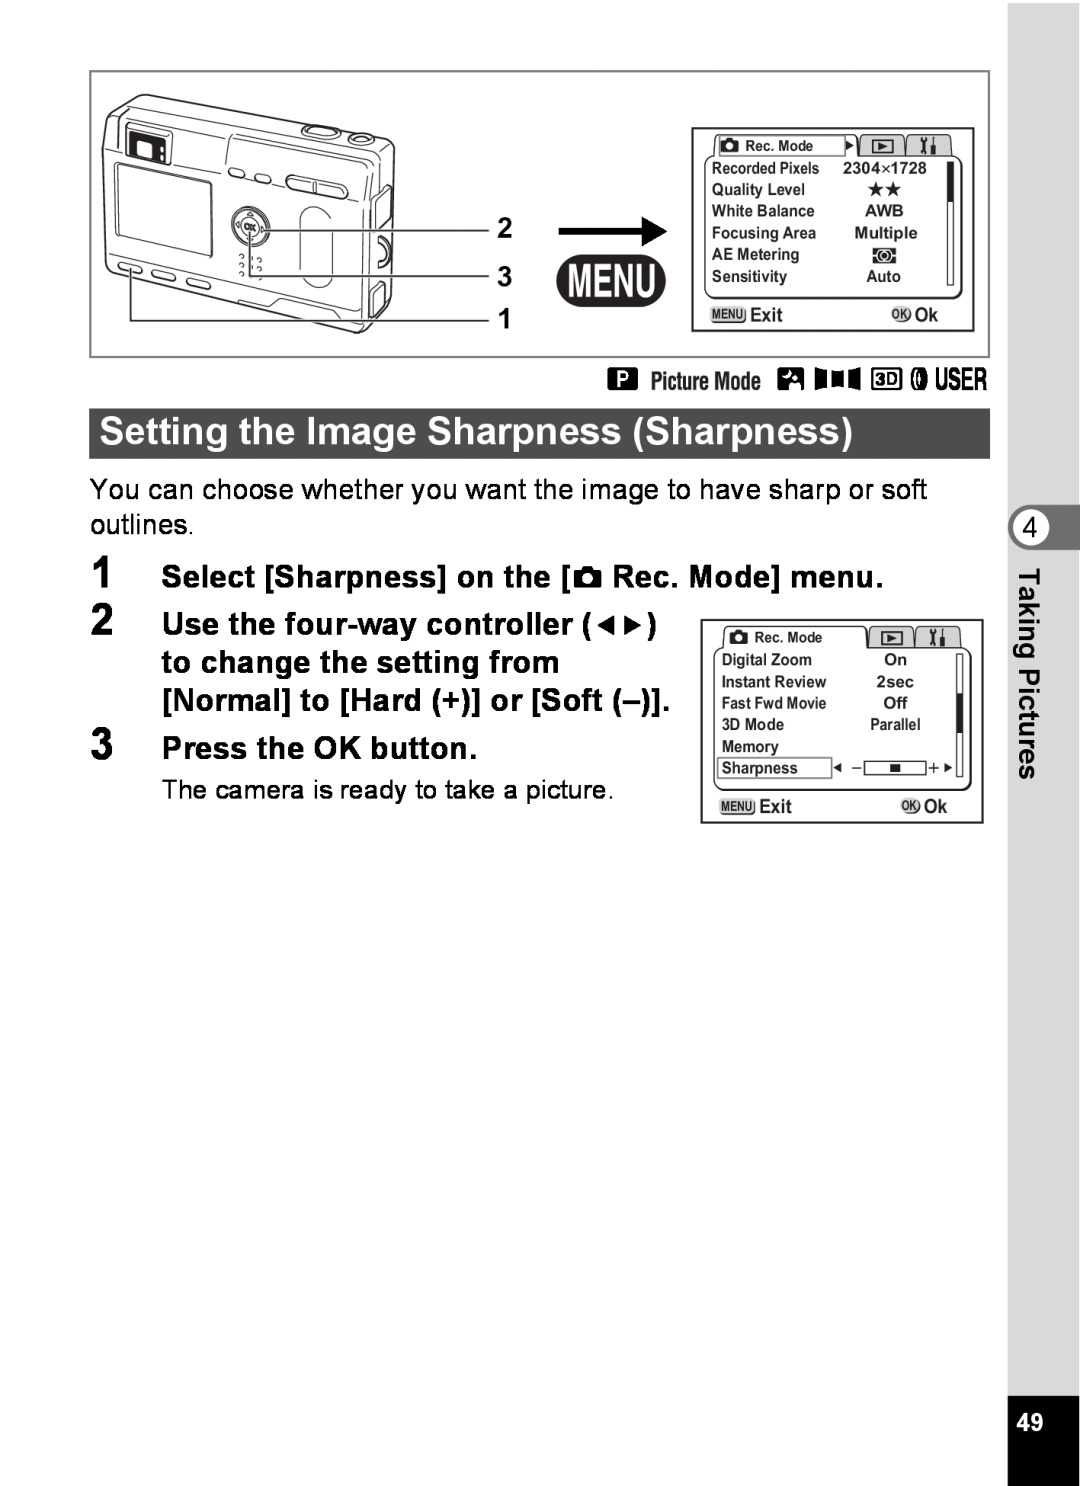 Pentax S4 Setting the Image Sharpness Sharpness, Select Sharpness on the A Rec. Mode menu, to change the setting from 